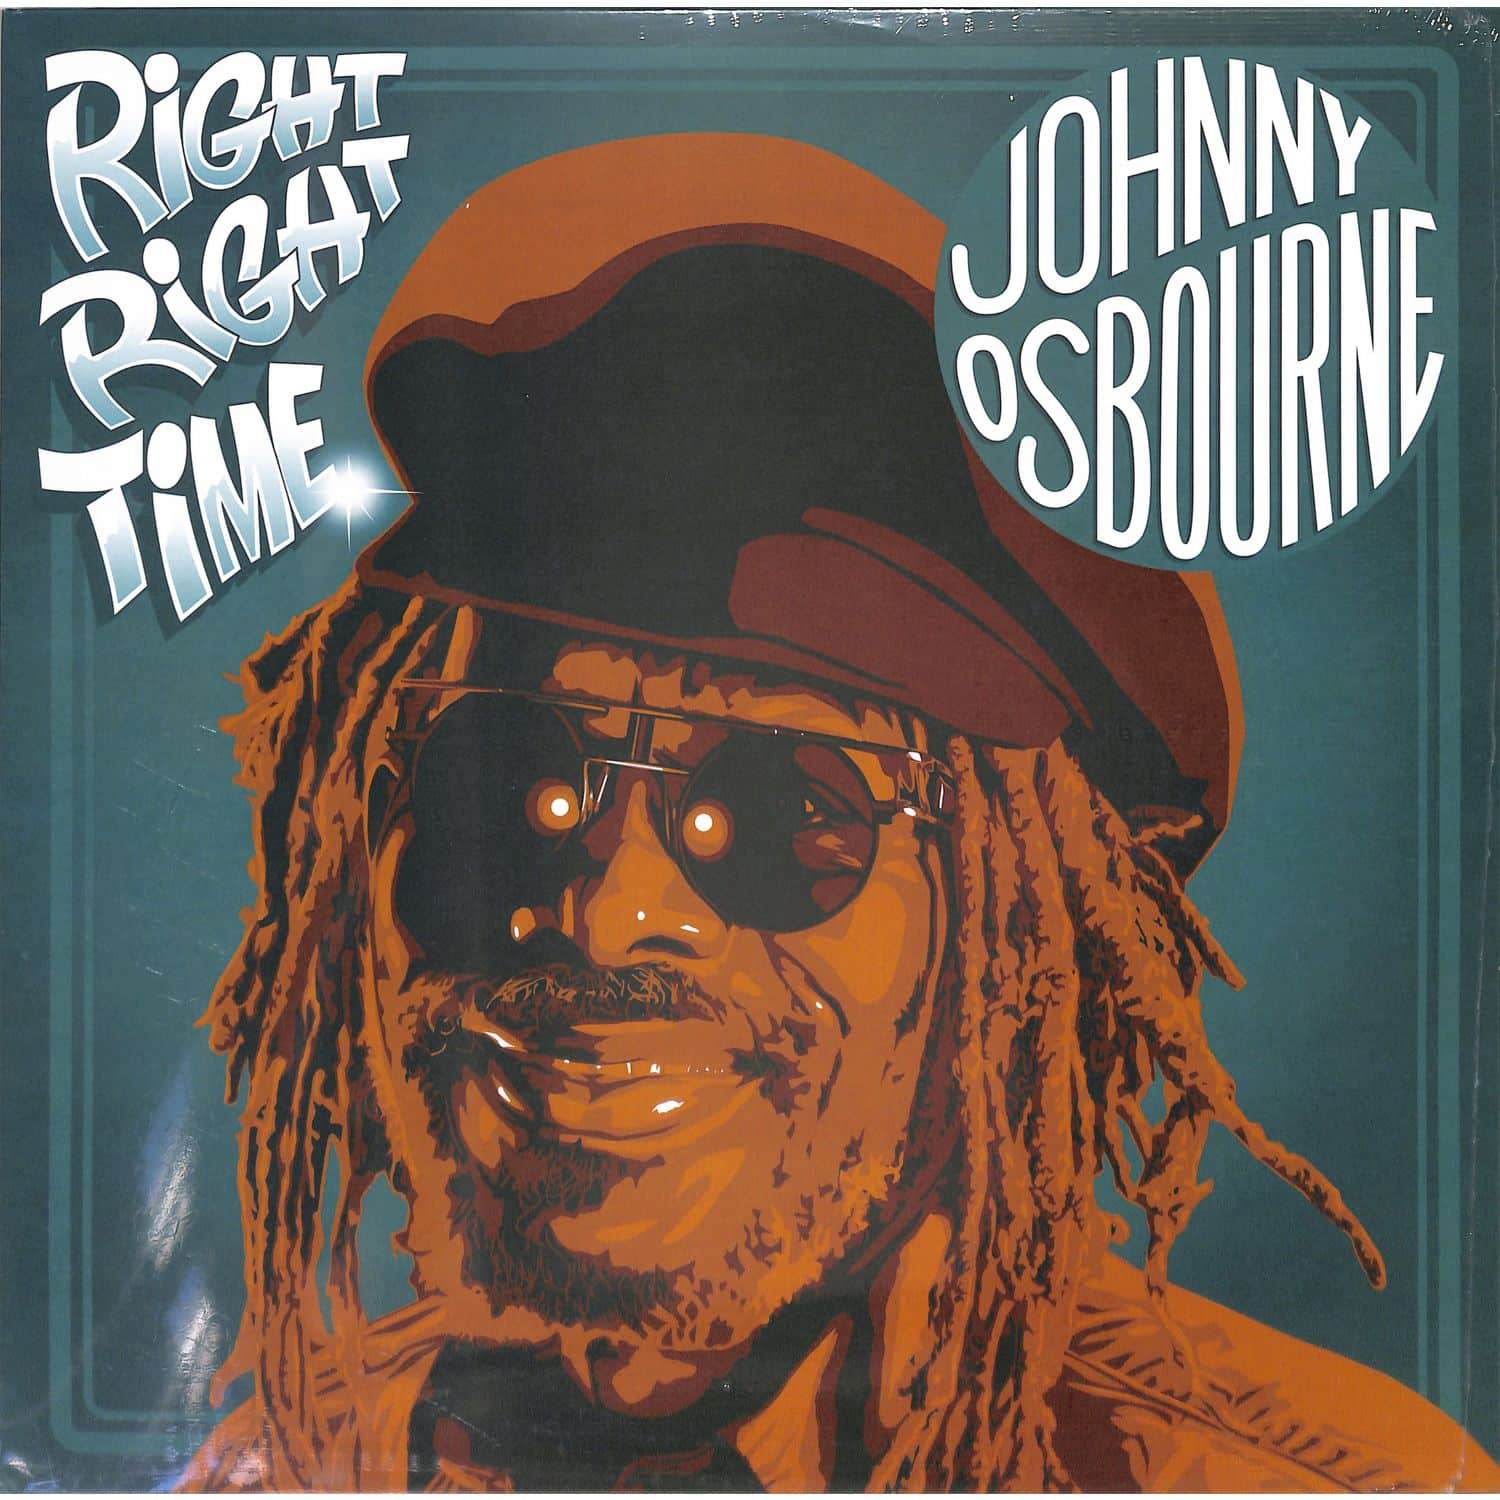 Johnny Osbourne  - RIGHT RIGHT TIME 